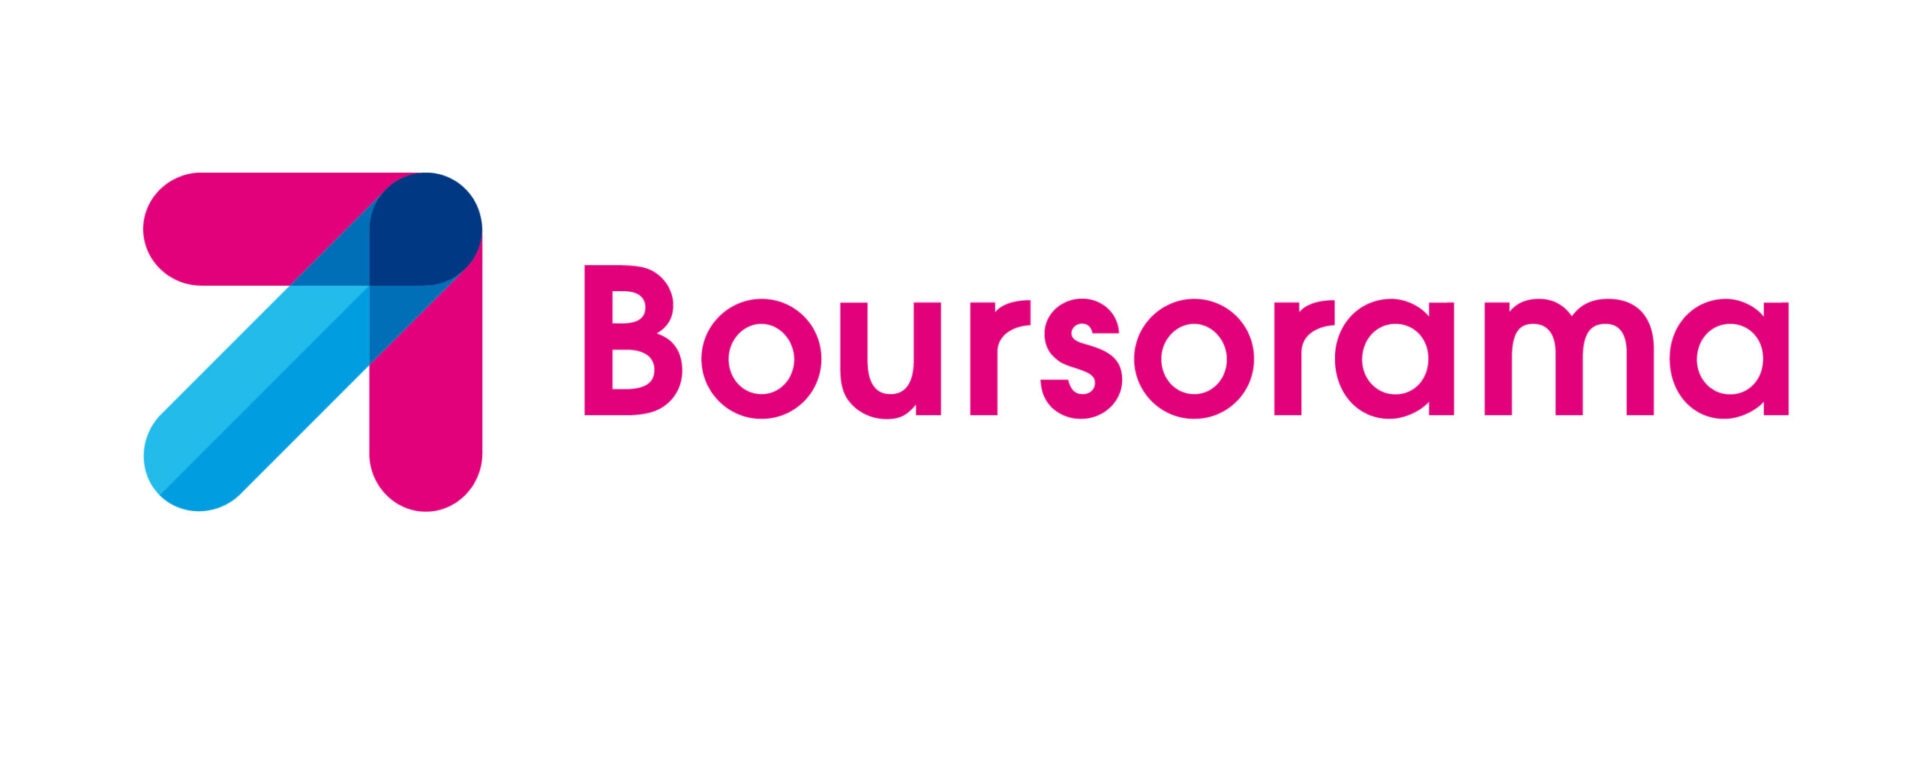 Boursorama: Enhancing Project Management Agility and Reliability